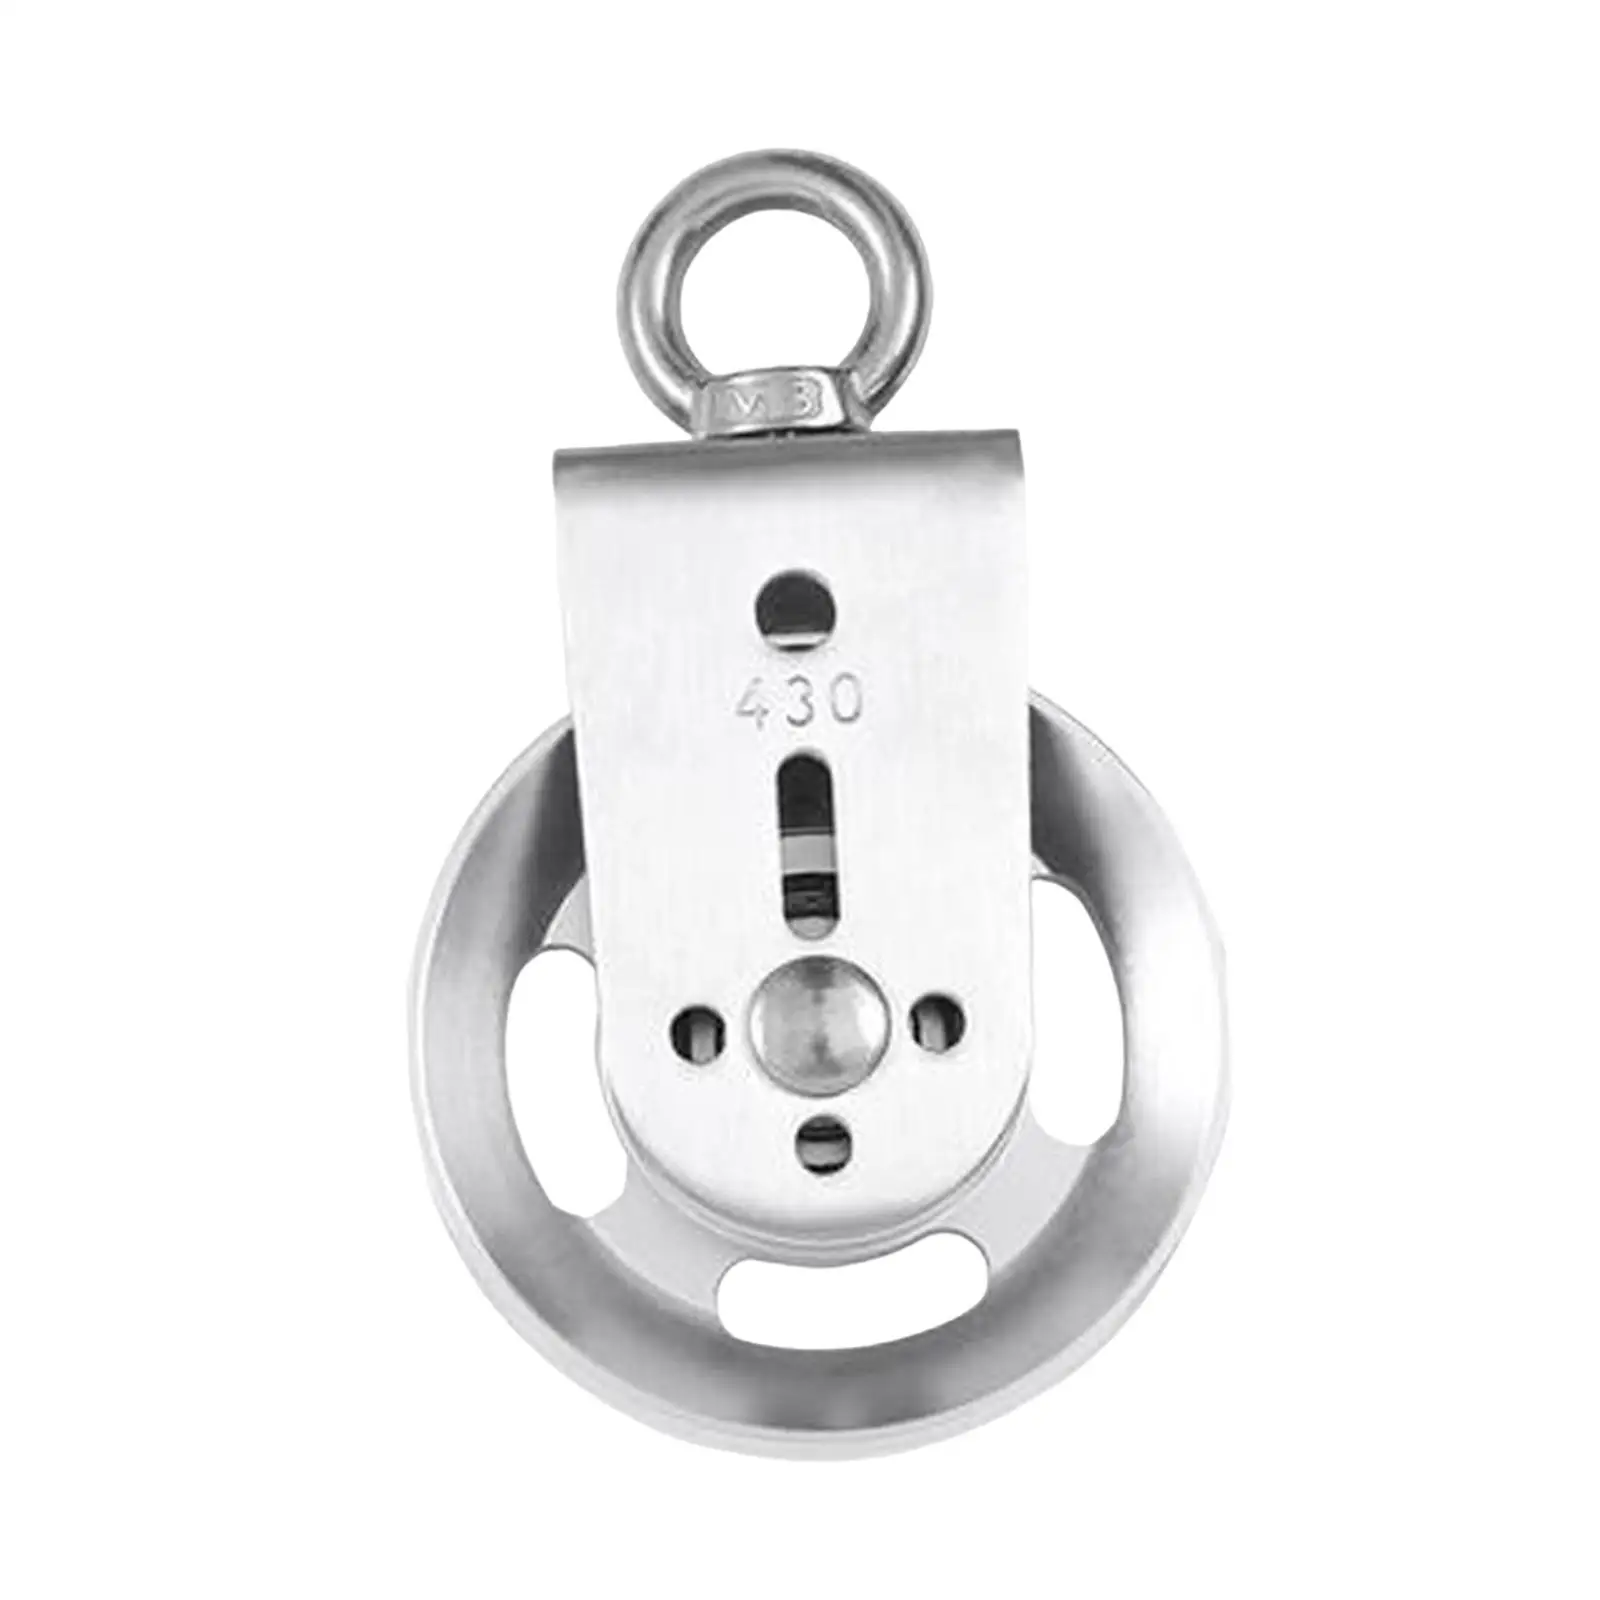 Pulley Wheel Durable Stainless Steel Sturdy Silent Lifting Pulley System for Cable Machines Gym Wire Rope Crane Traction Fitness